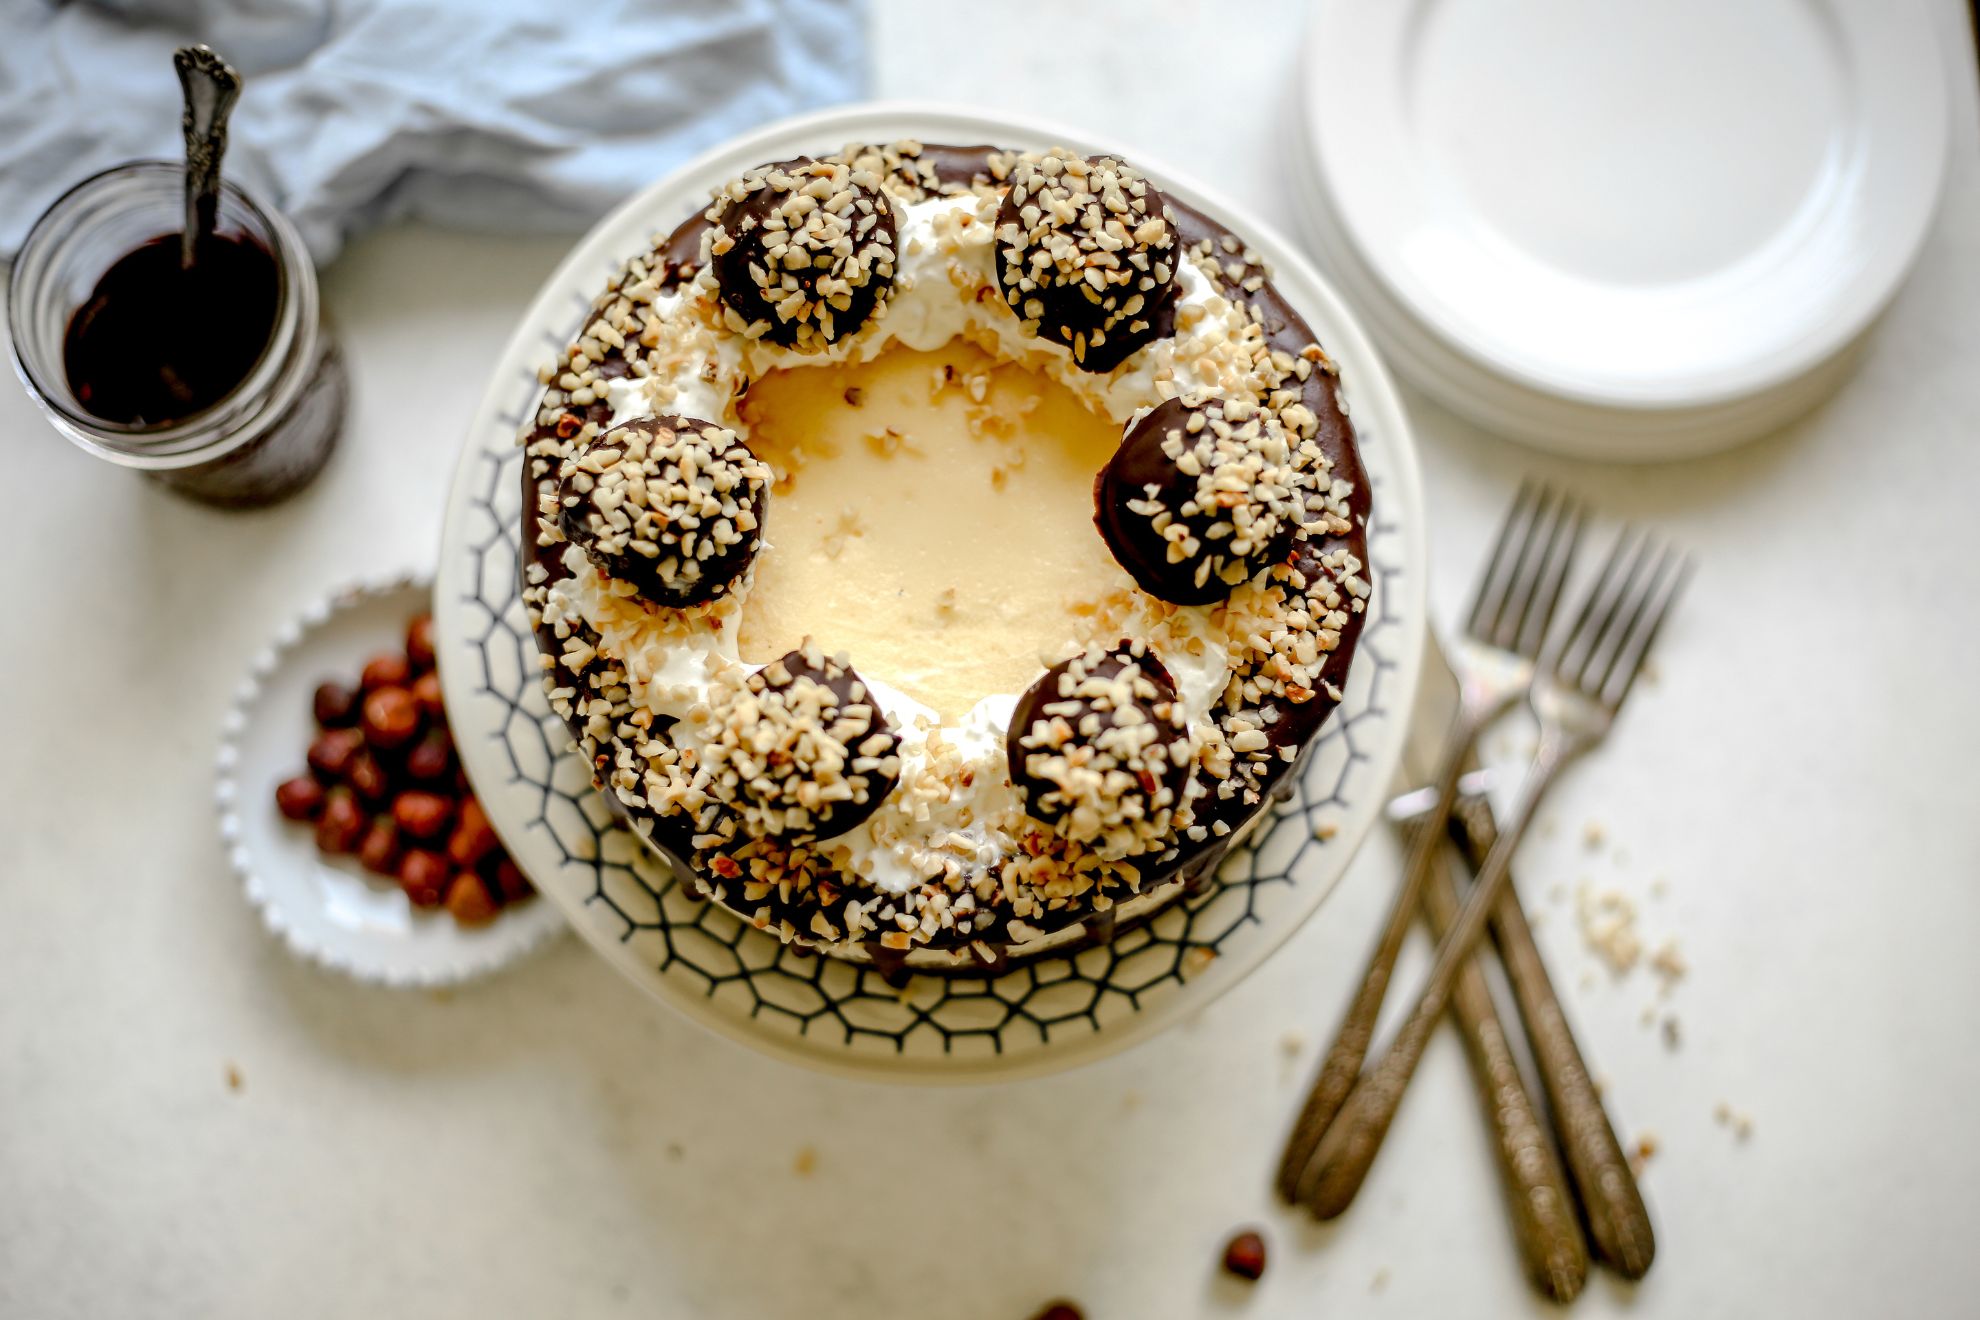 This is an overhead horizontal image of a cheesecake topped with whipped cream, chocolate, chopped nuts and ferrero rocher candies. The cheesecake is on a white cake stand with black design detail. Beneath the cake stand to the left is a small bowl of hazelnuts and a jar of chocolate with a spoon sticking out. To the right of the cake stand is a pile of plates and forks and knives to the right bottom corner of the image.